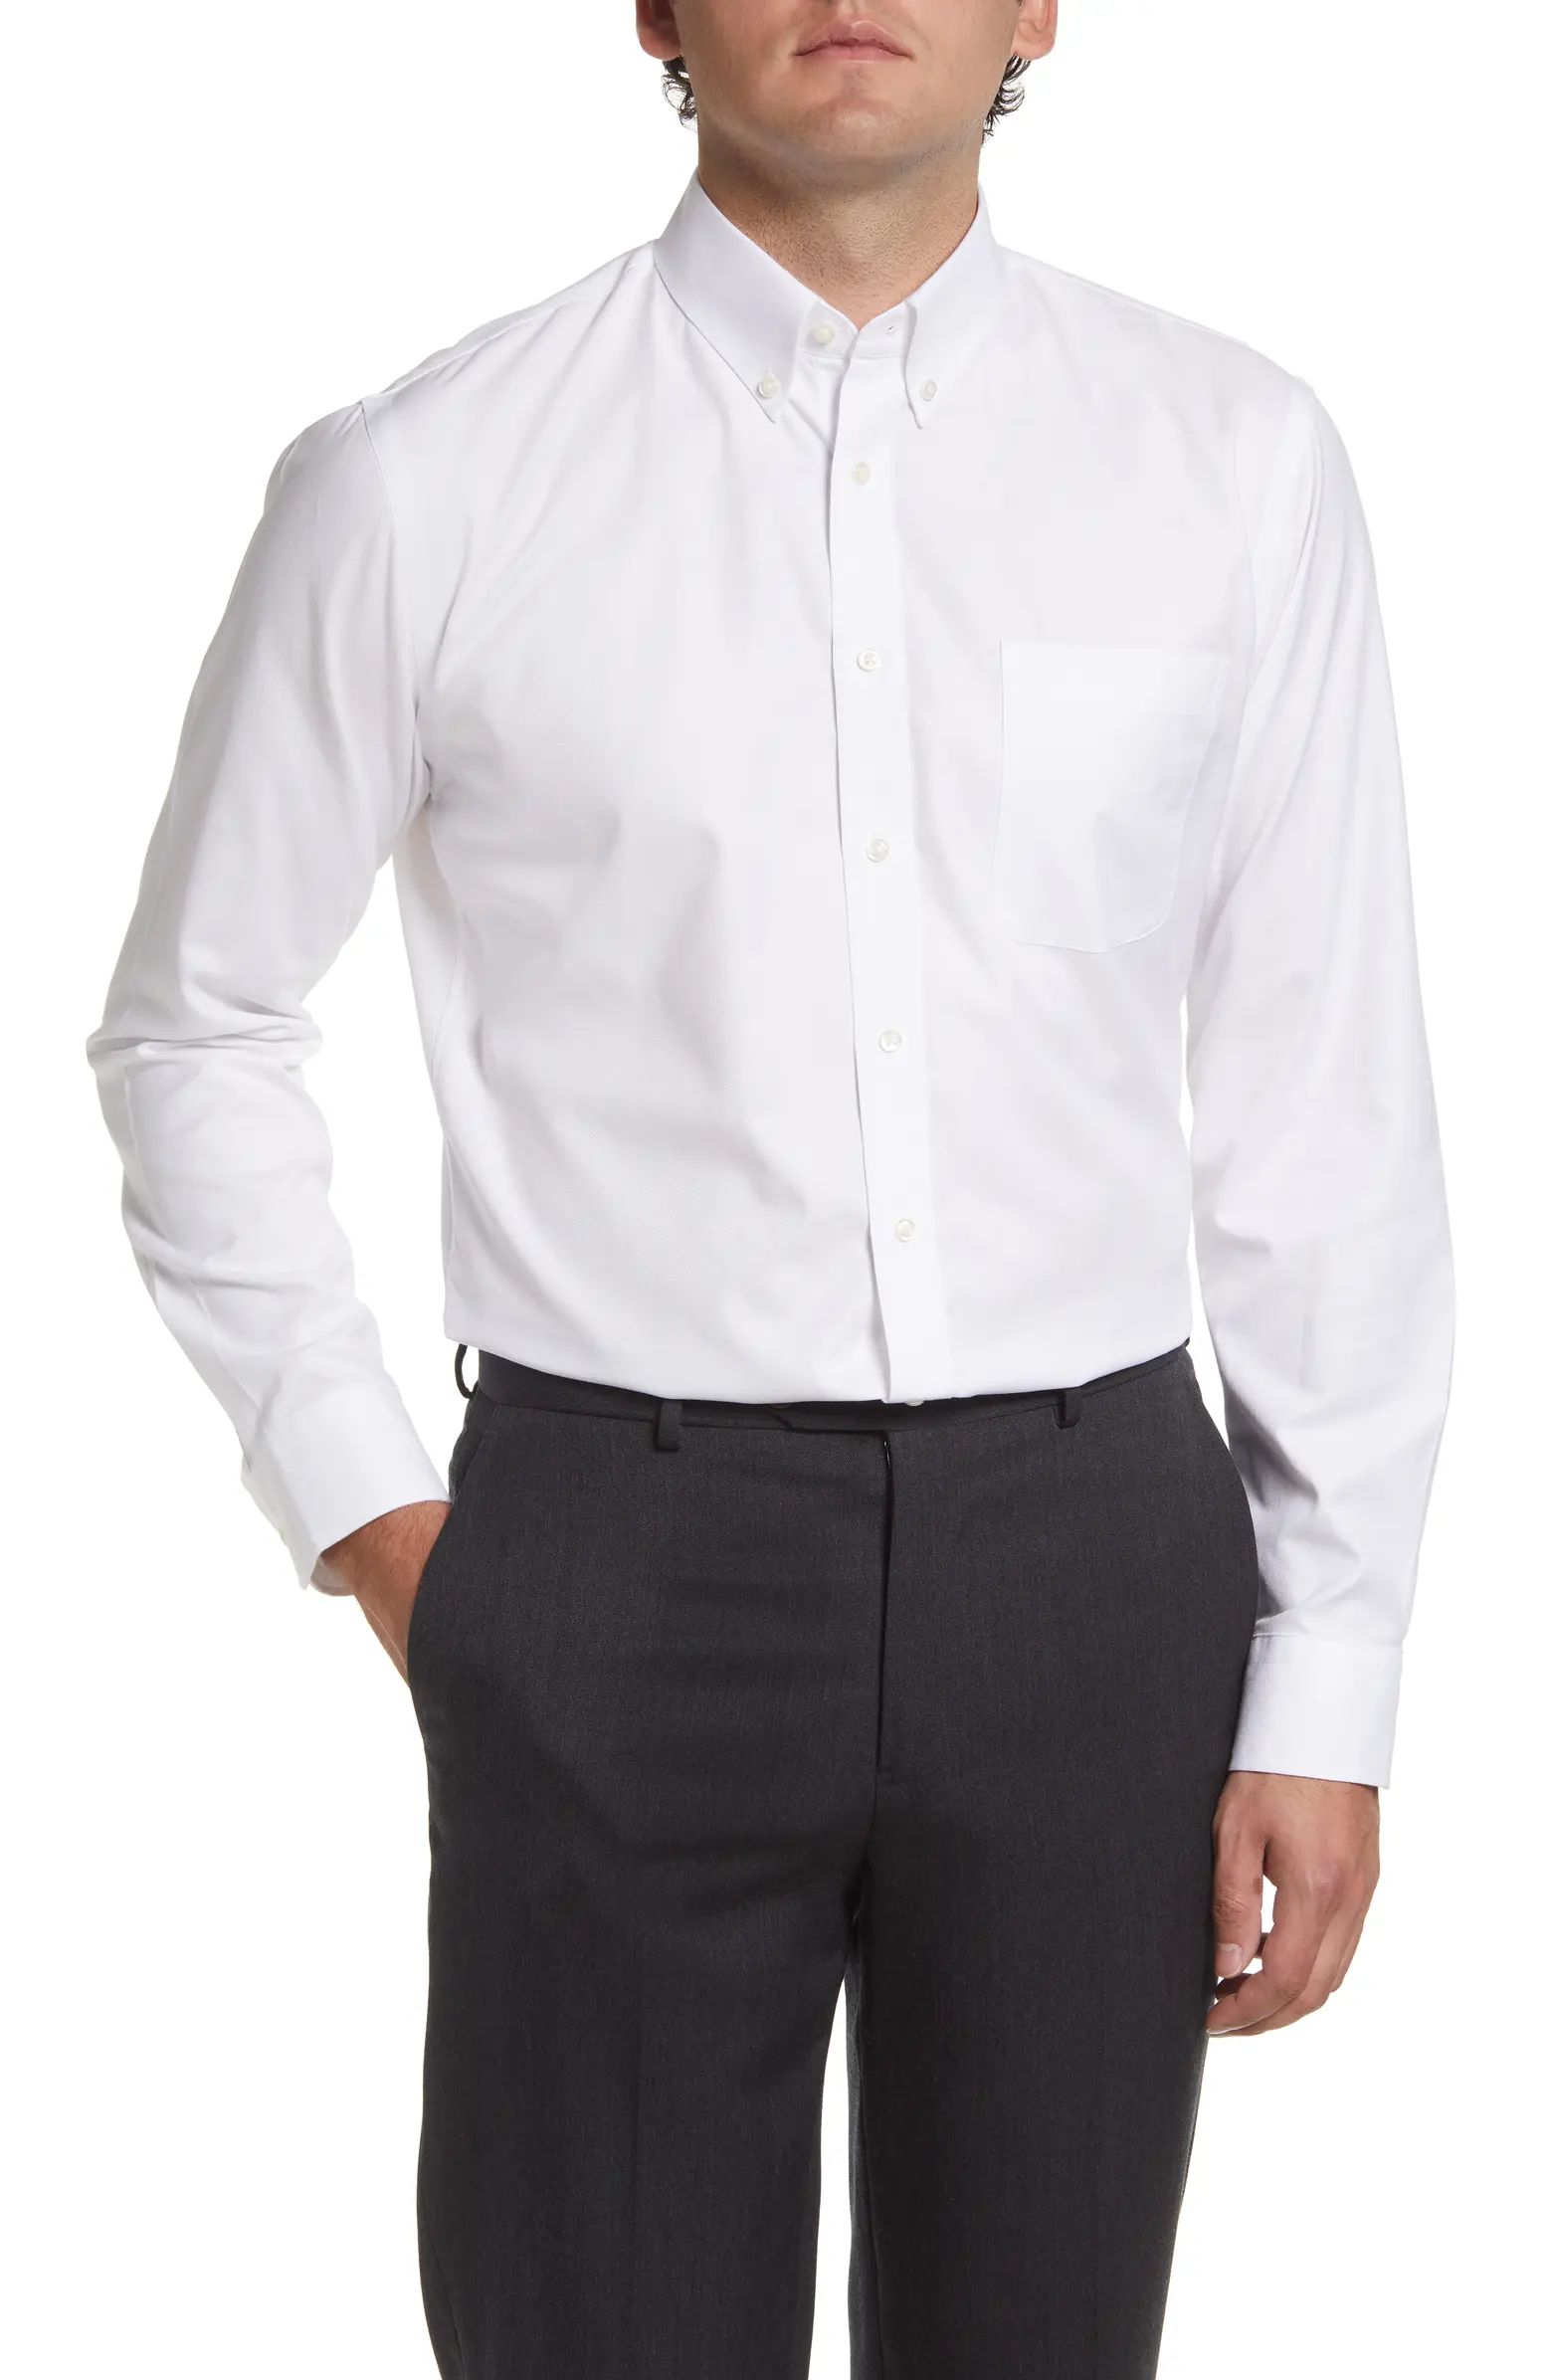 Nordstrom Trim Fit Non-Iron Royal Oxford Solid Button-Down Dress Shirt | Nordstrom | Nordstrom